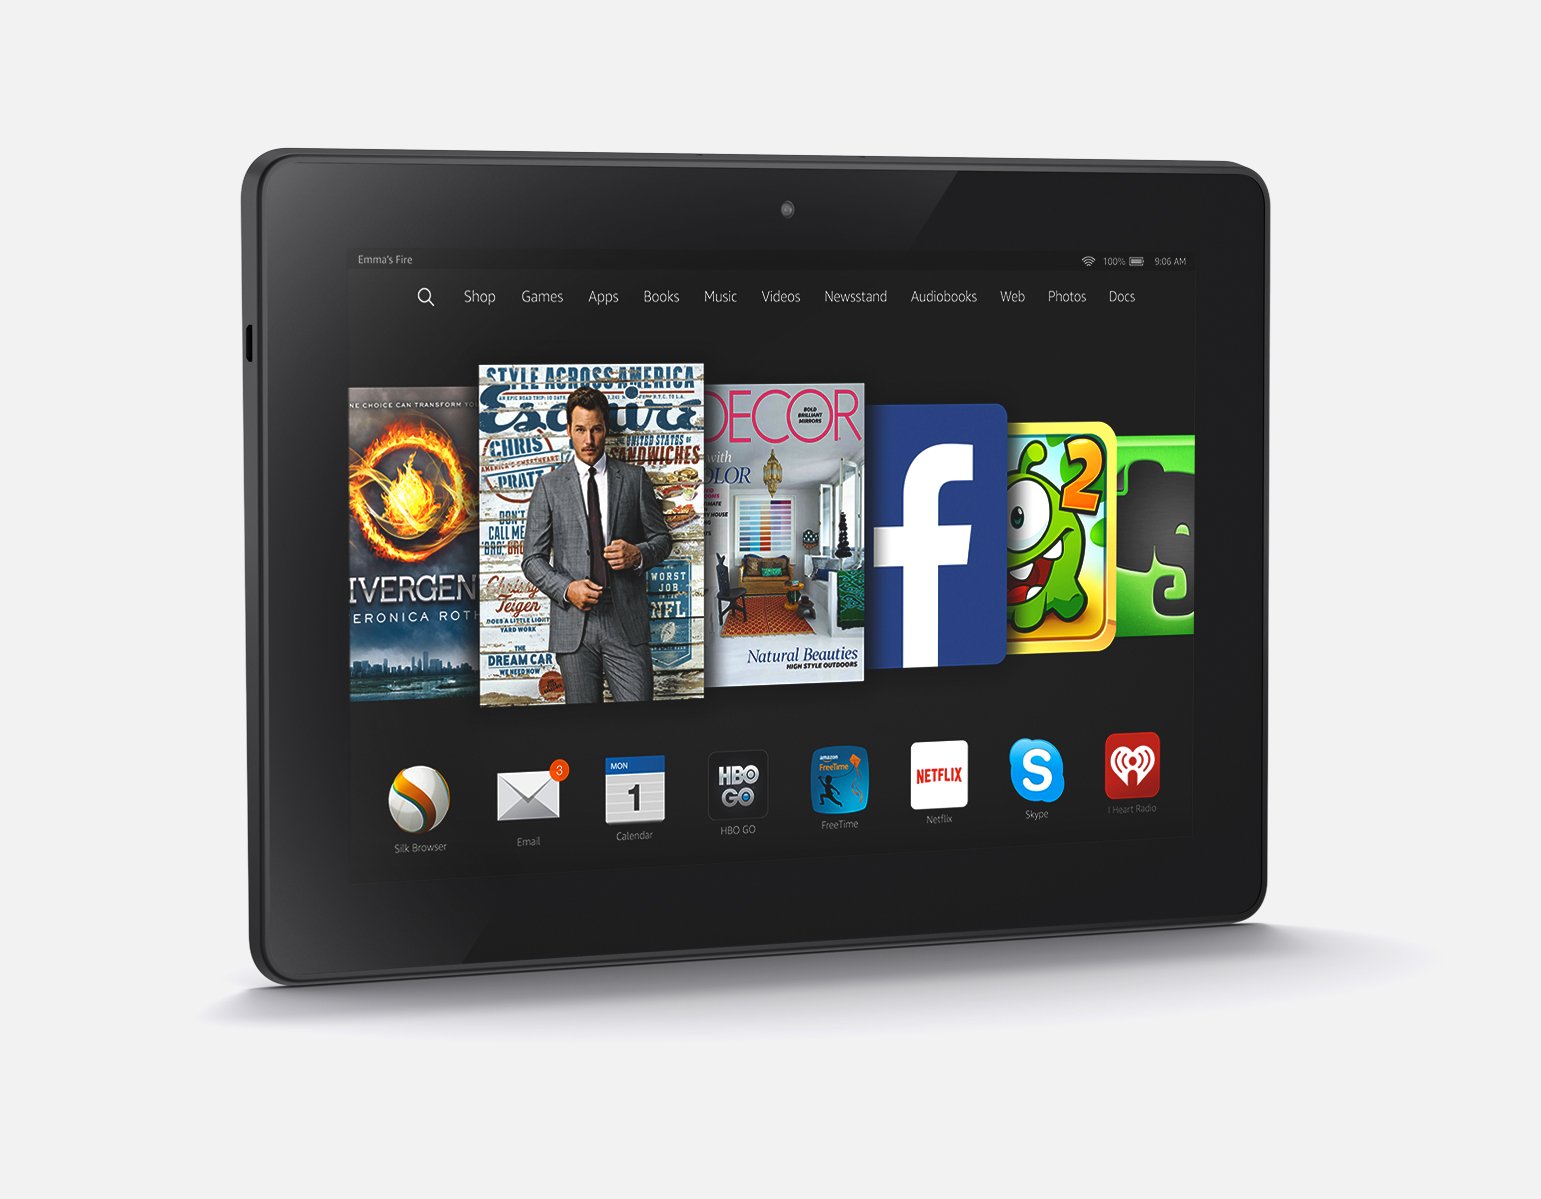 You can connect the Kindle Fire HDX and Kindle Fire to your HDTV and your data syncs great even to iPhone or Android.